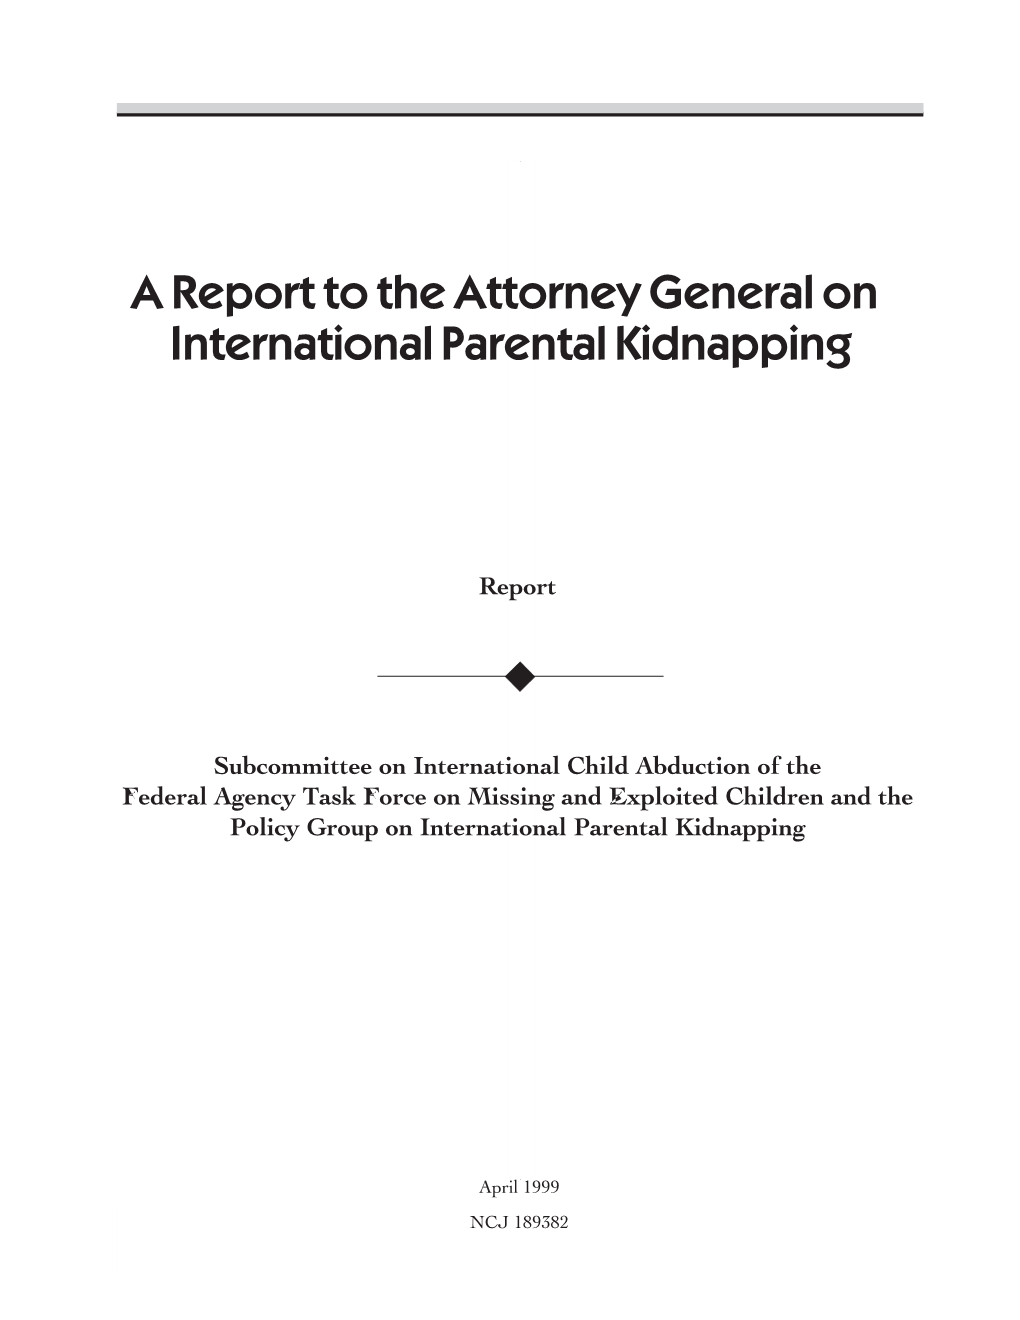 A Report to the Attorney General on International Parental Kidnapping